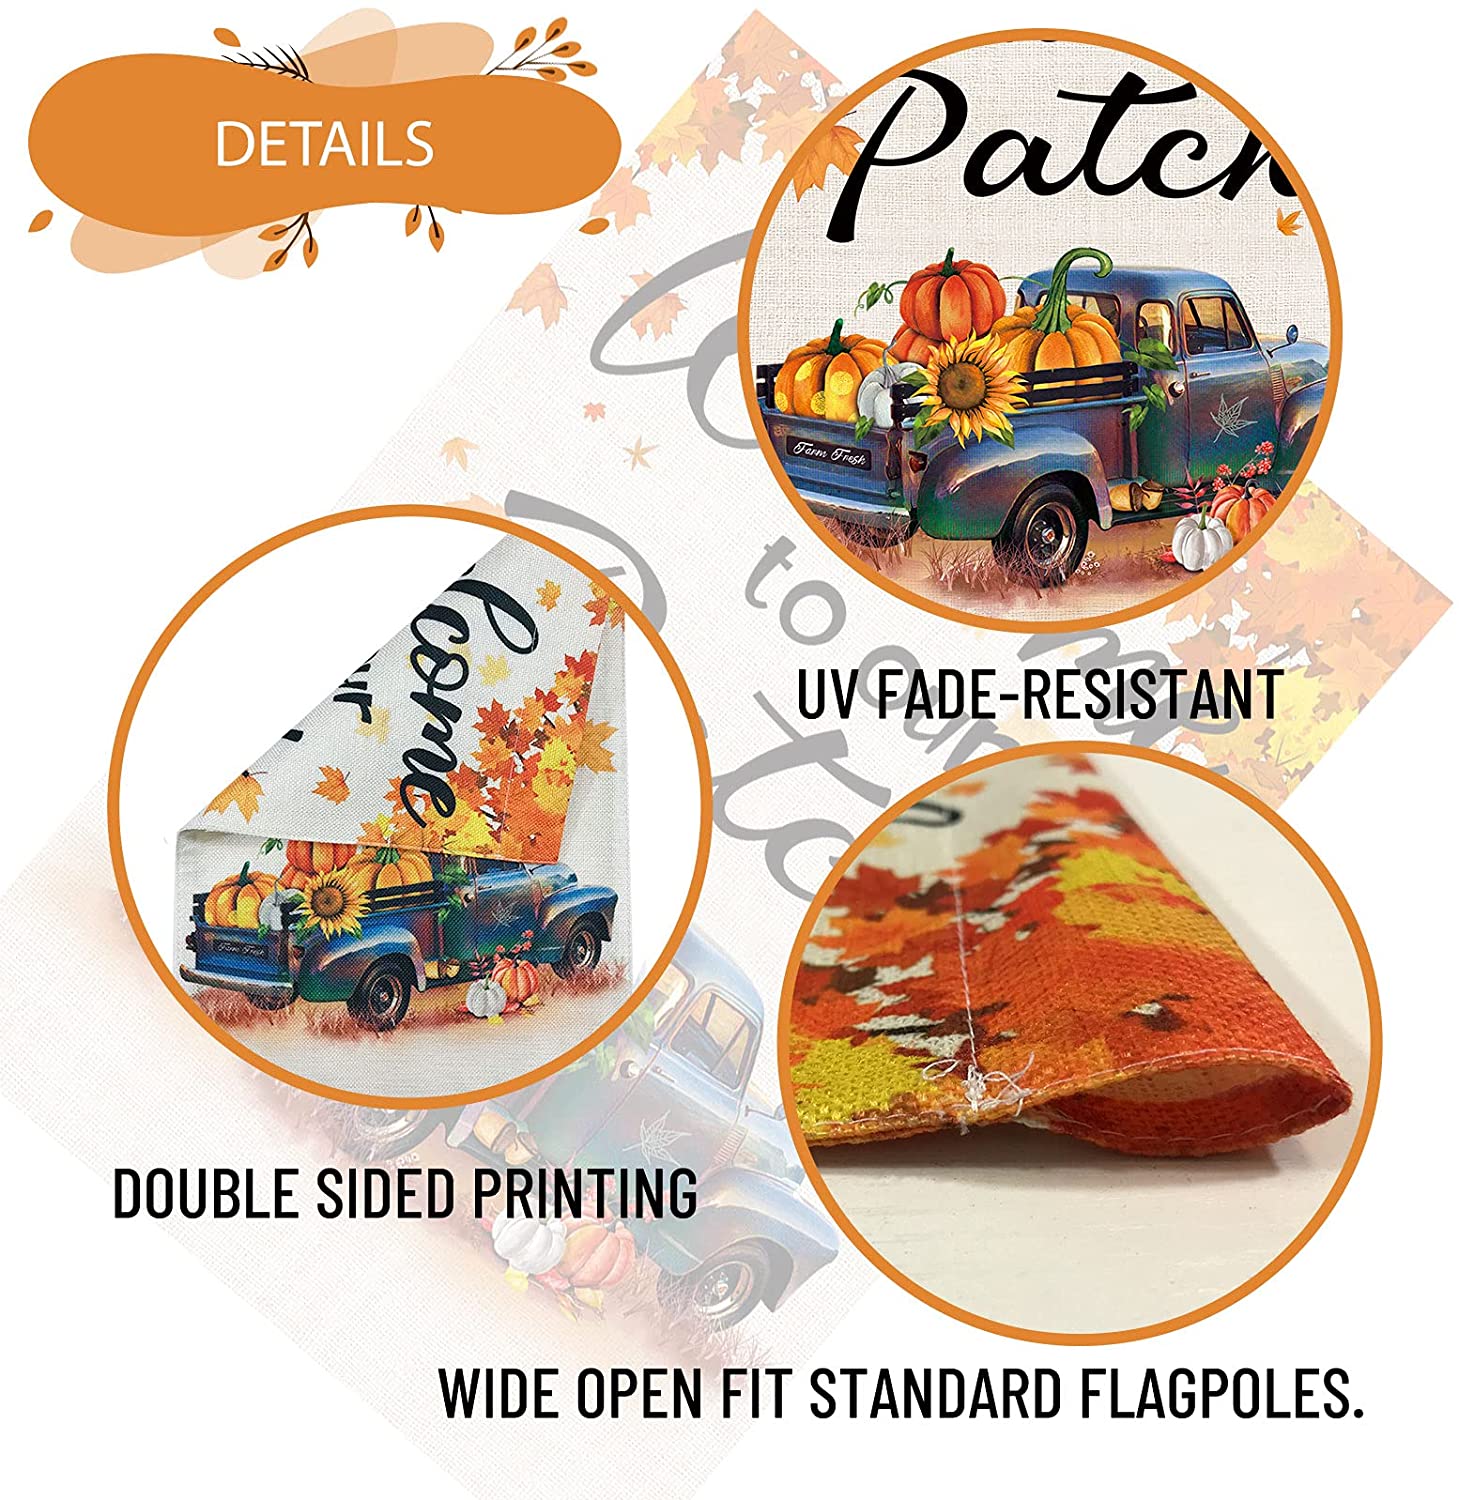 2 Pcs Double Sided Farm Fresh Fall Garden Flags 12 x 18 (Truck, Bicycle)